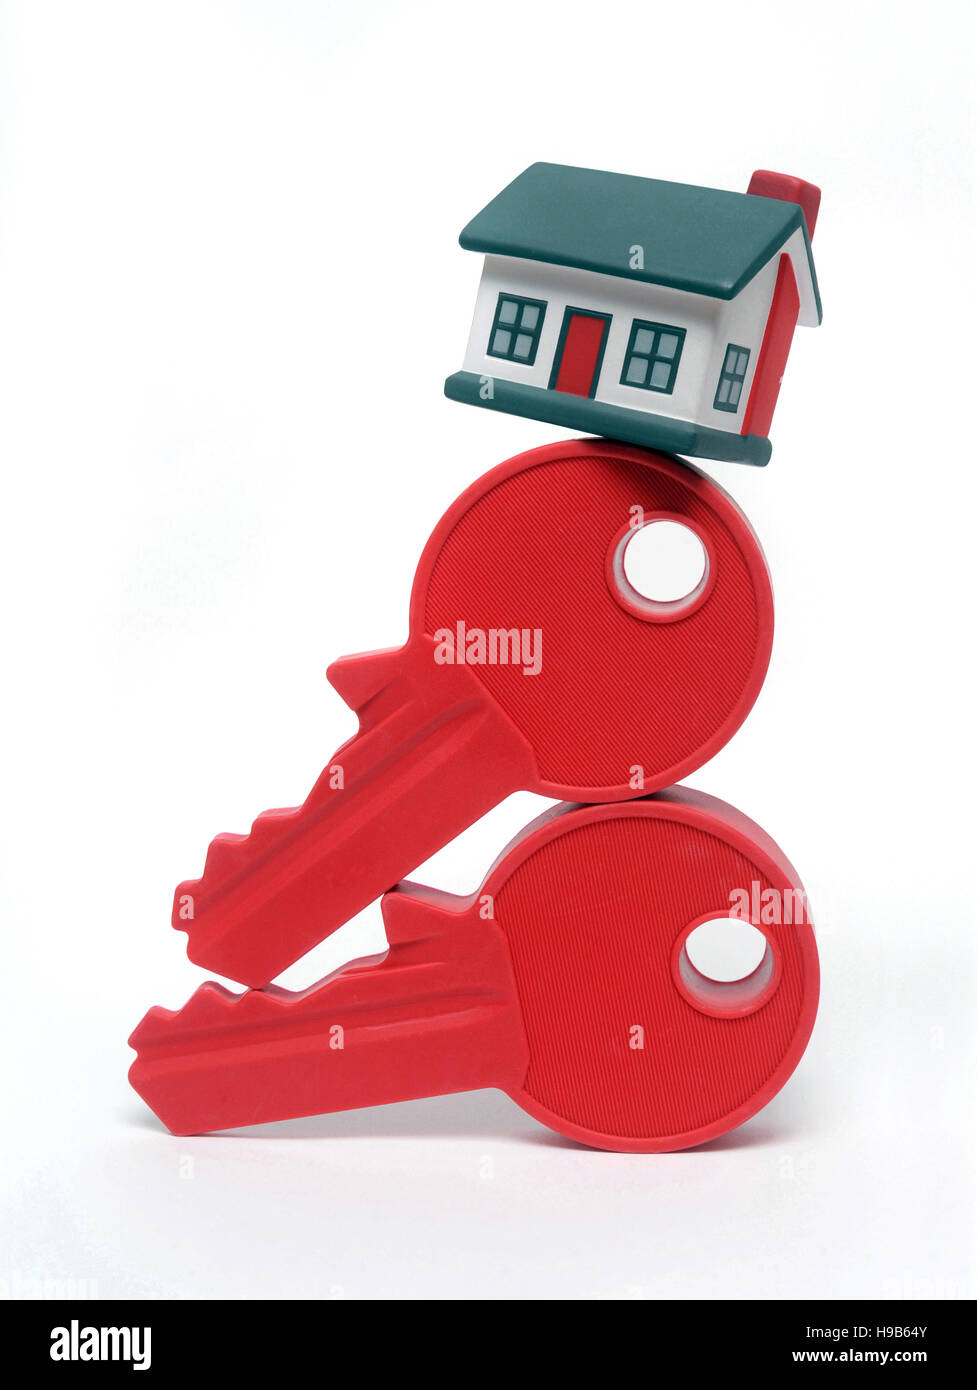 HOUSE BALANCING ON HOUSE KEYS RE HOUSING MARKET HOMES BUYING PRICES MORTGAGES LOANS FIRST TIME BUYERS INCOMES WAGES PROPERTY UK Stock Photo